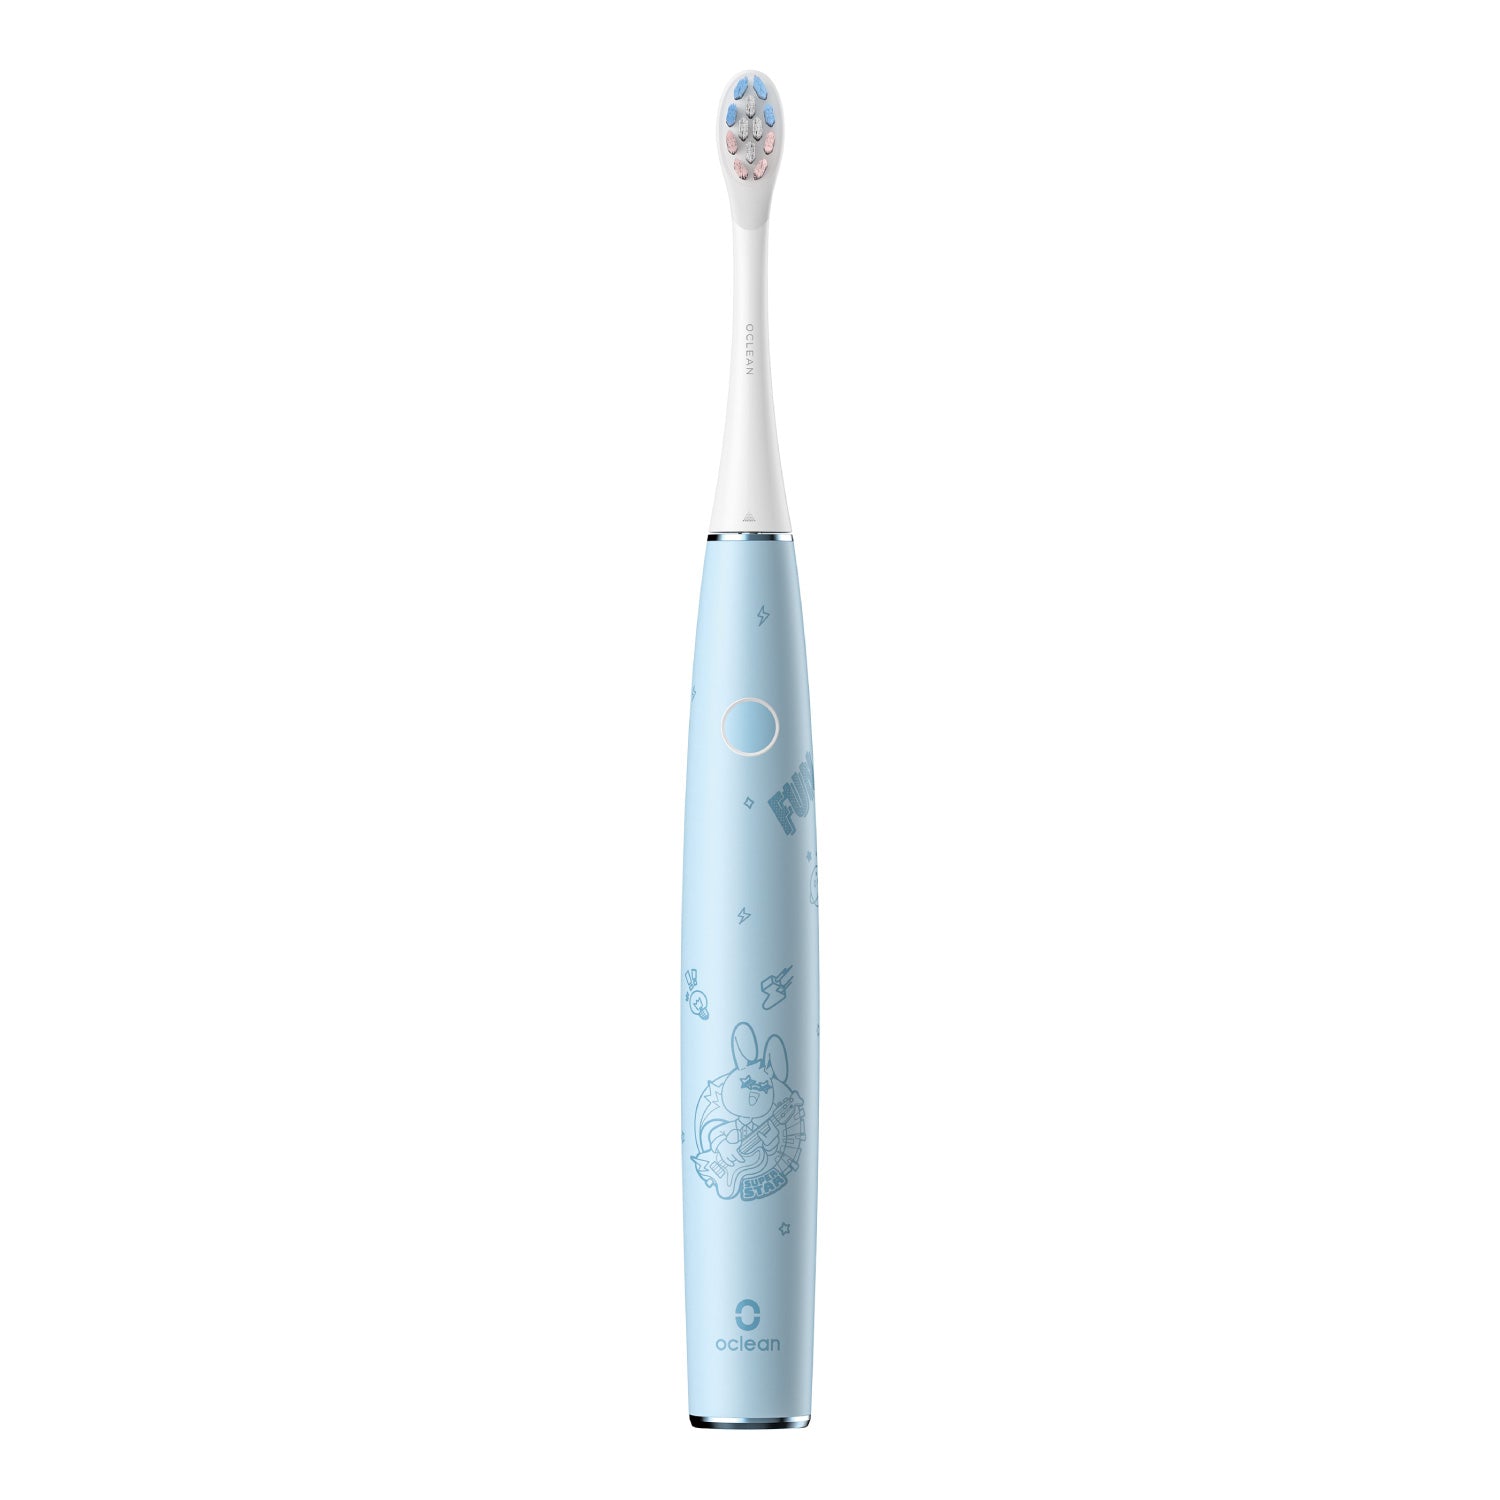 Oclean Kids Electric Toothbrush Toothbrushes Blue  Oclean US Store